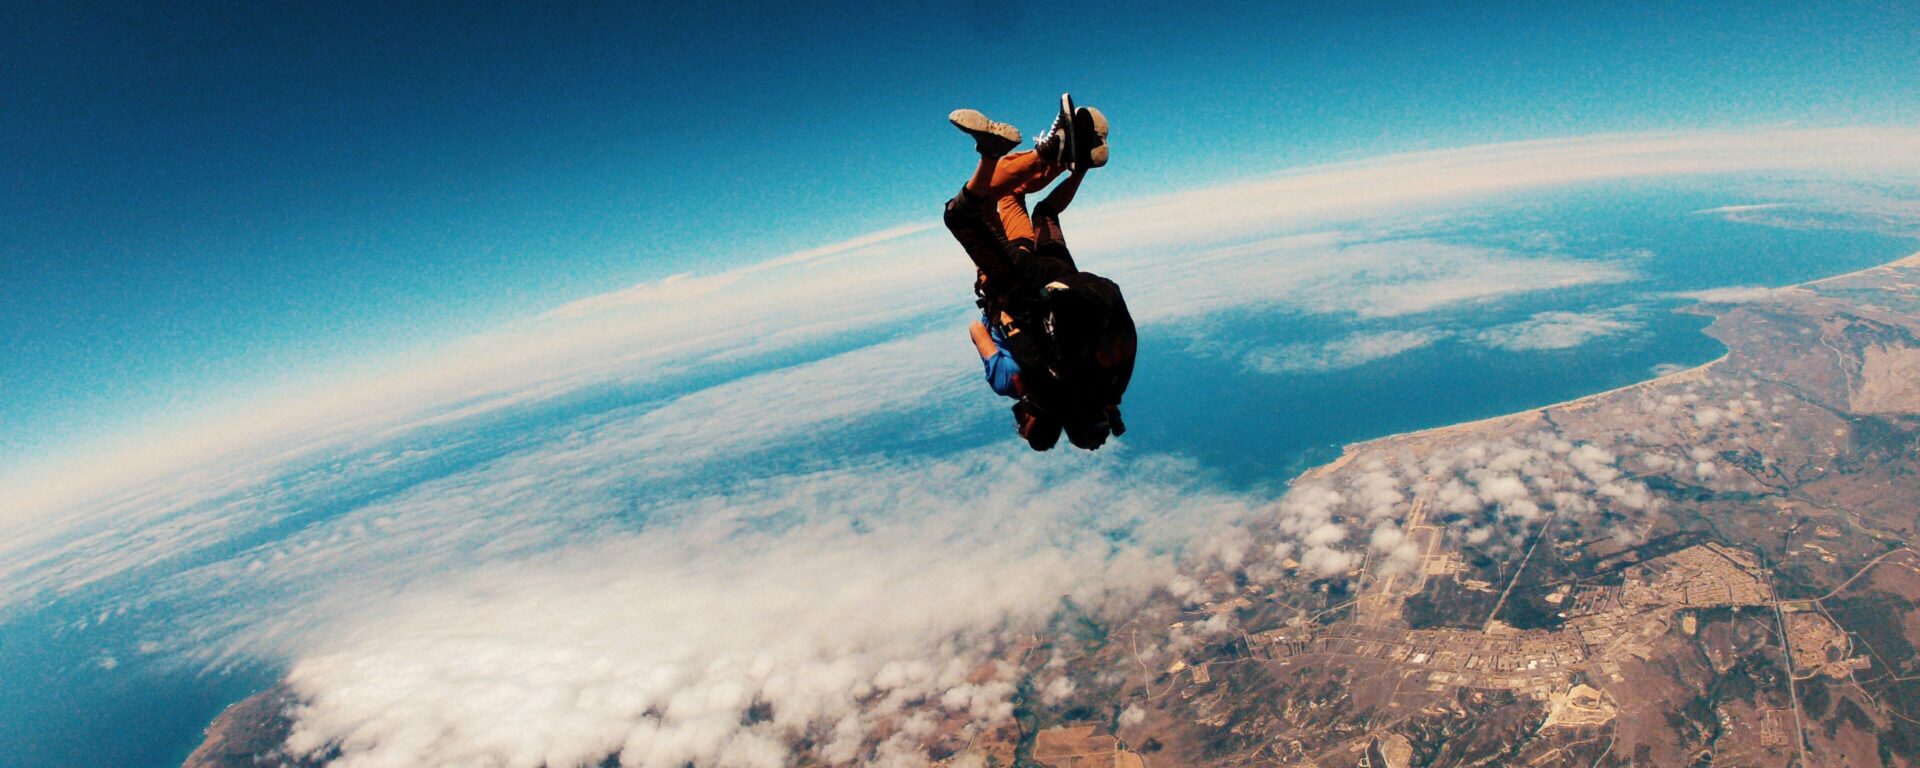 Person skydiving at daytime.